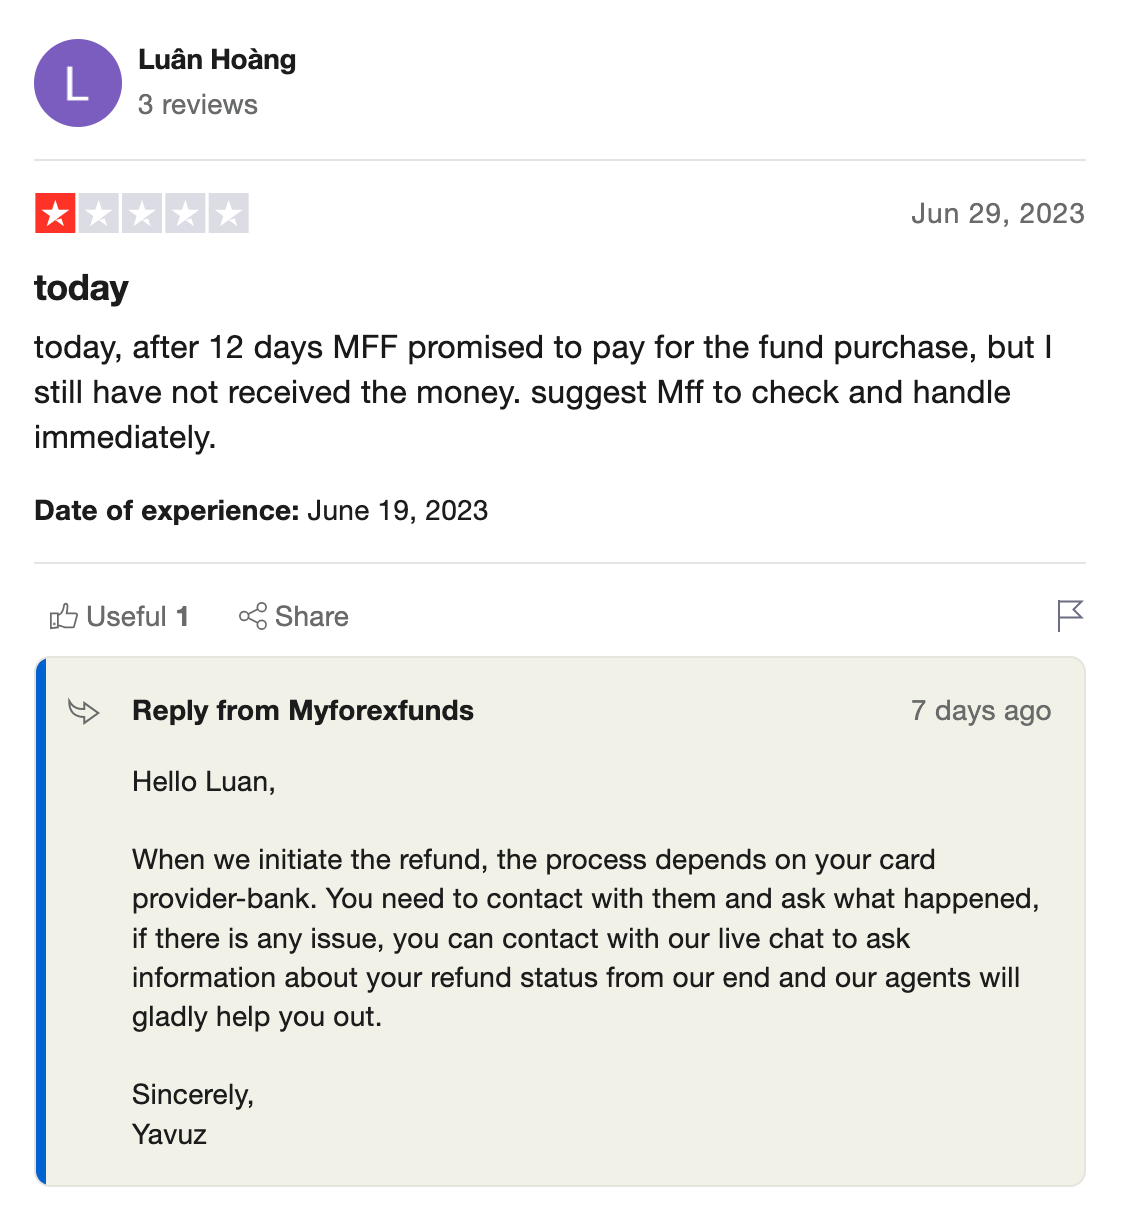 Review-quy-MFF-TraderViet3.png